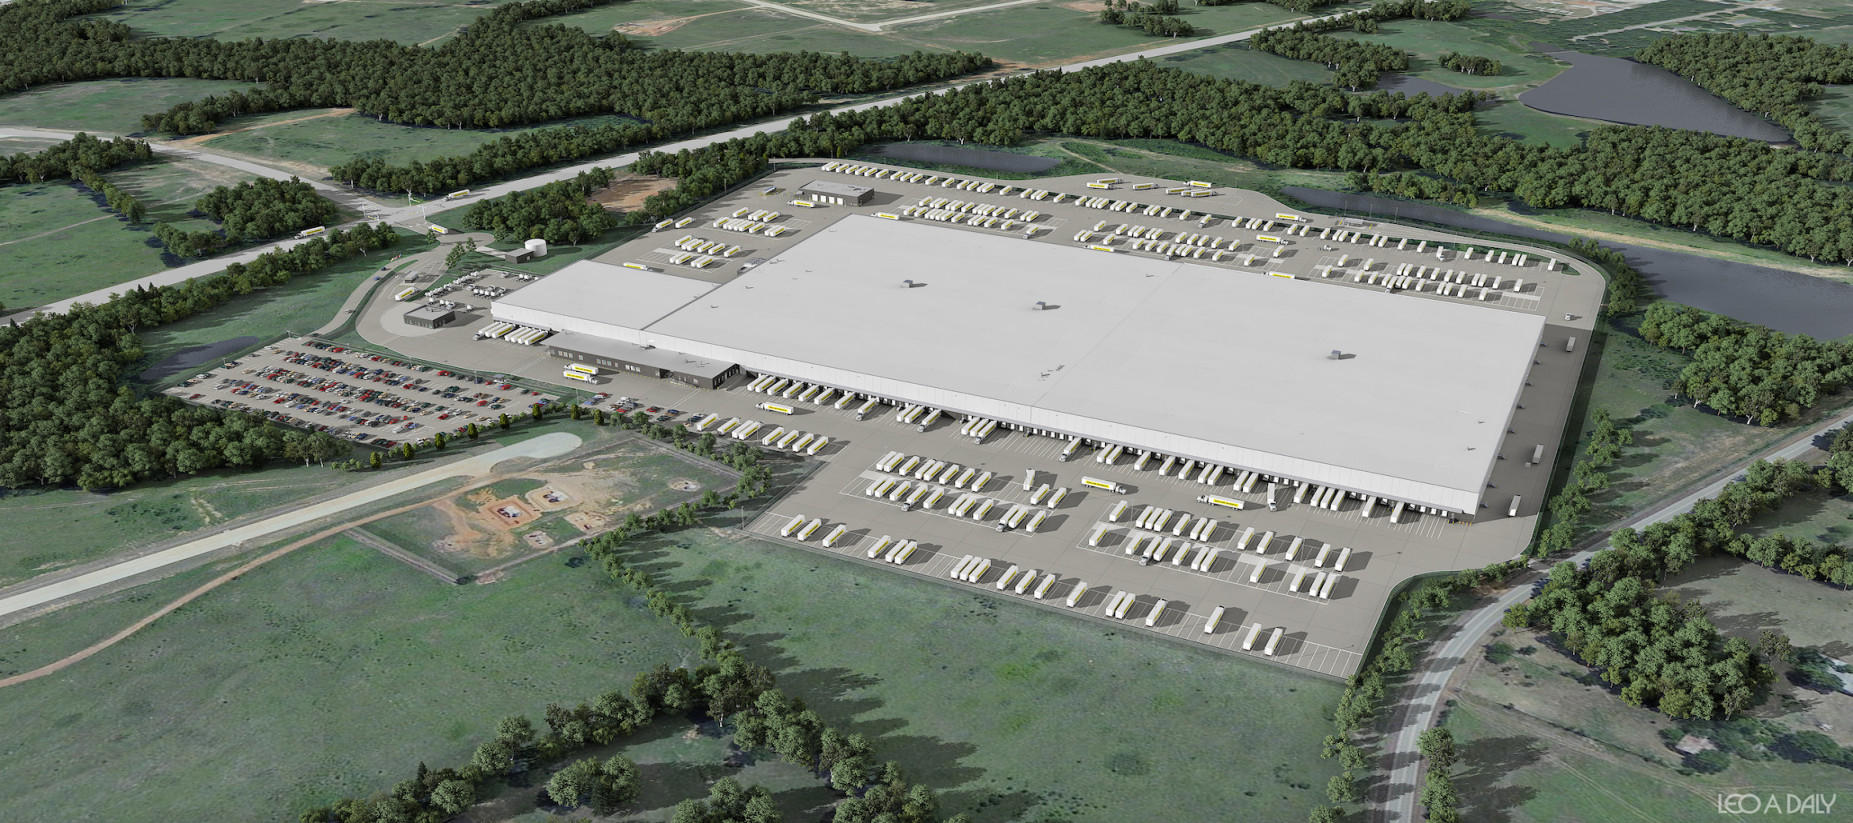 Dollar General Announces to Build New Distribution Center and